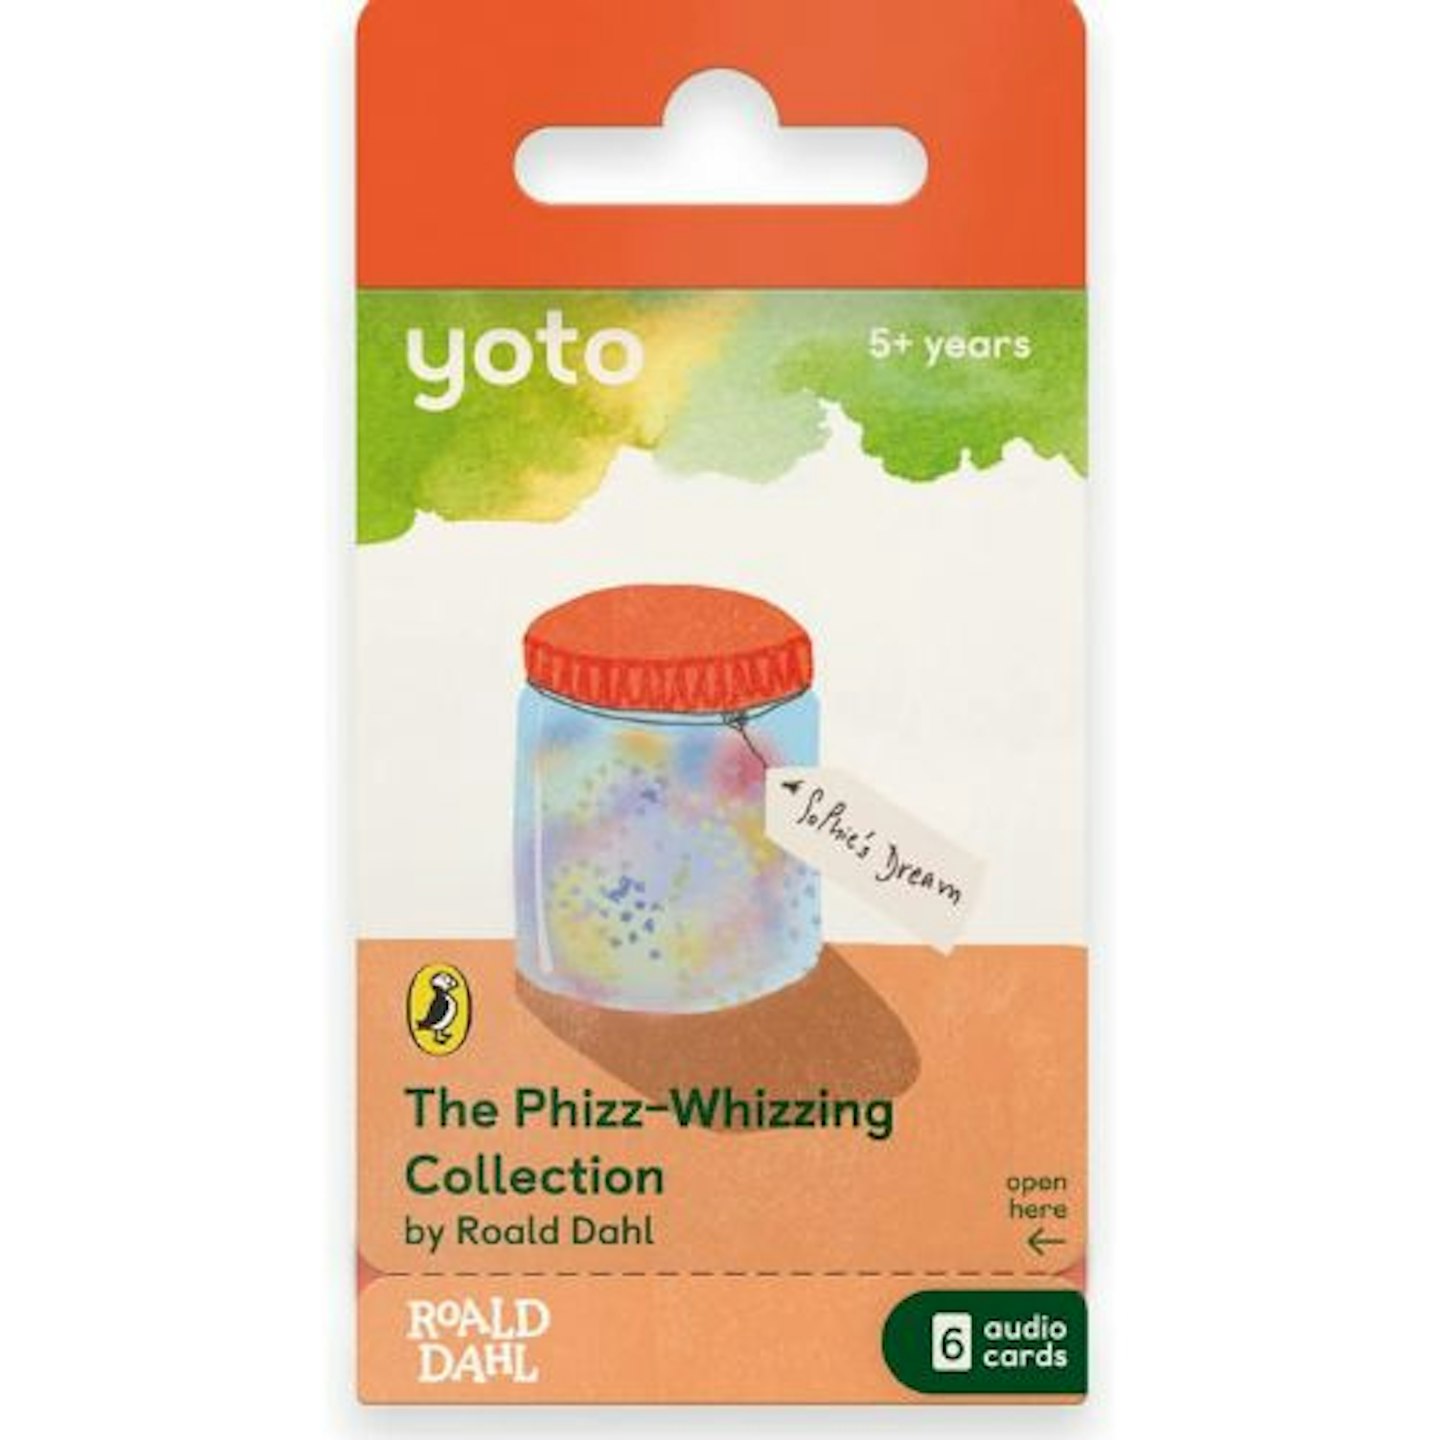 Best Yoto Player story cards Yoto The Phizz-Whizzing Collection by Roald Dahl